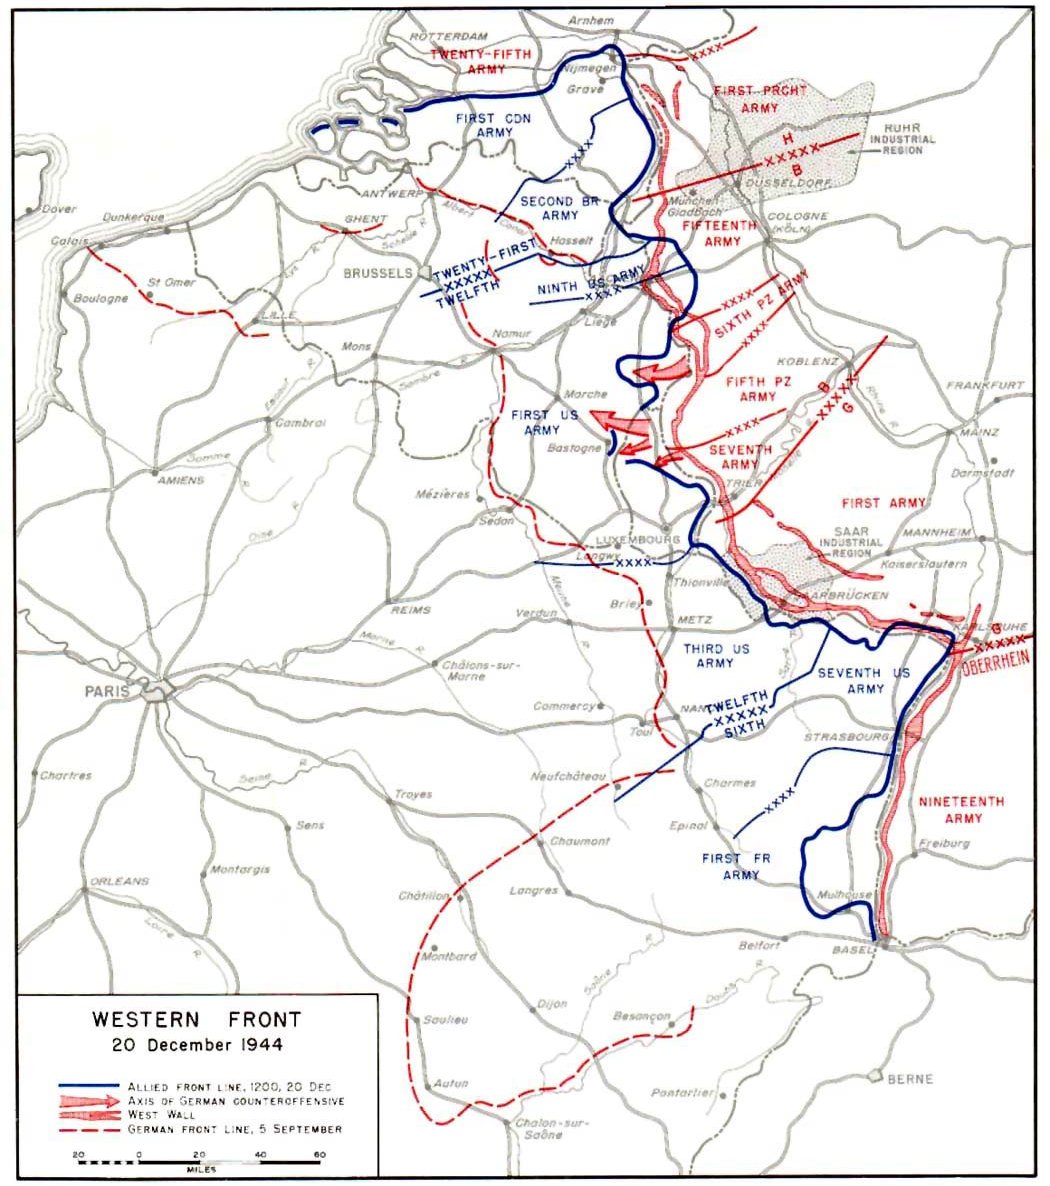 Map depicting the western front of the European War, 20 Dec 1944